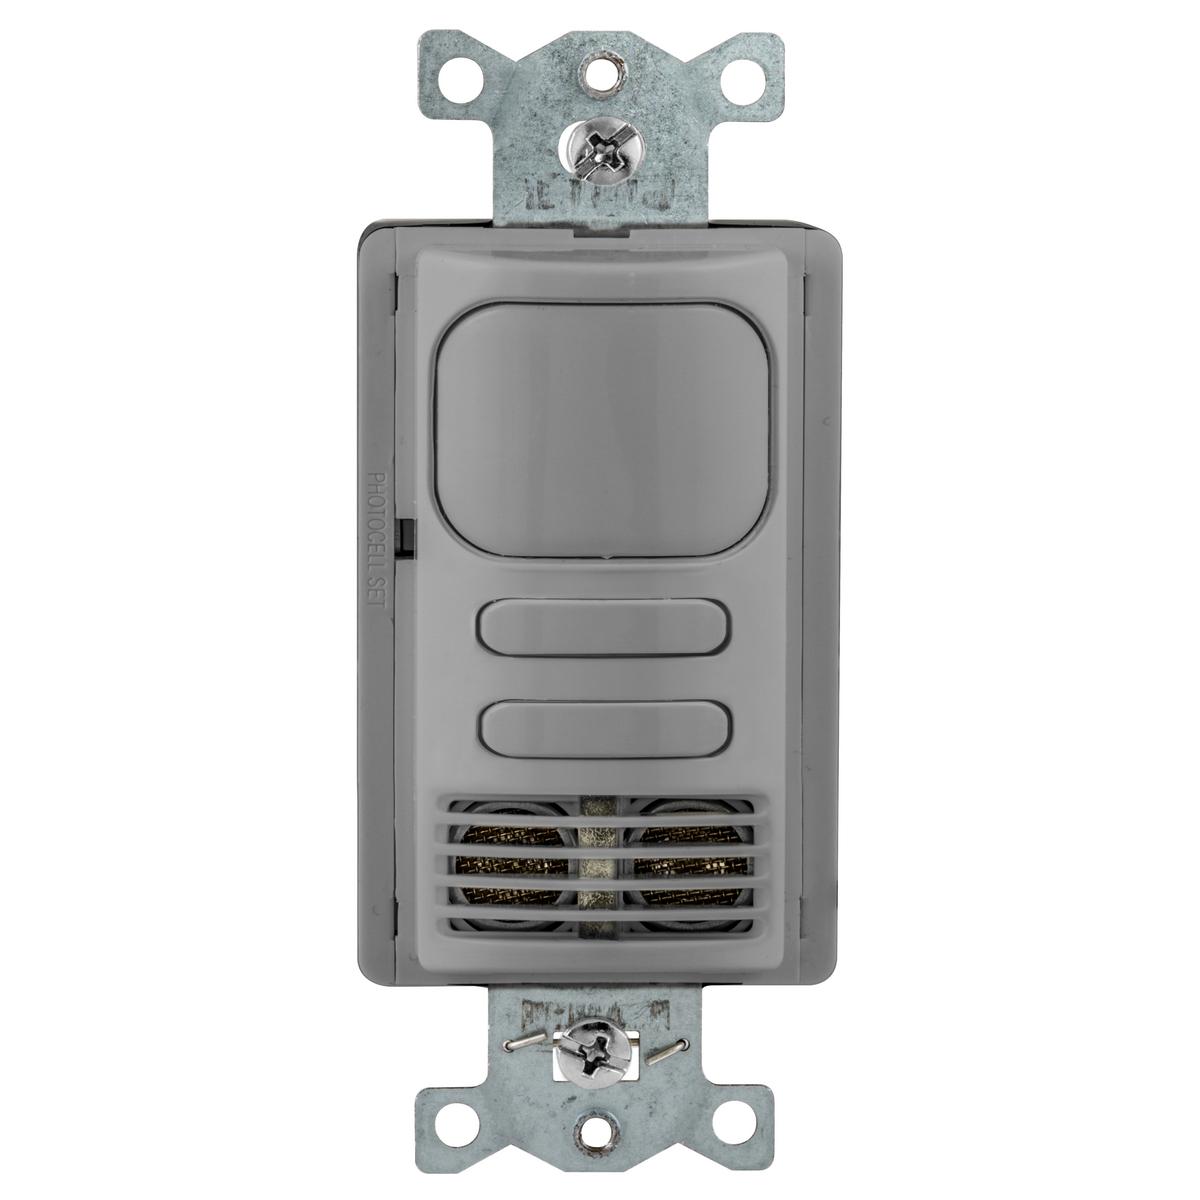 Hubbell AD2001GY22 Vacancy Sensors, Wall Switch, AdaptiveDual Technology, 2 Circuit, 120/277V AC, Gray 